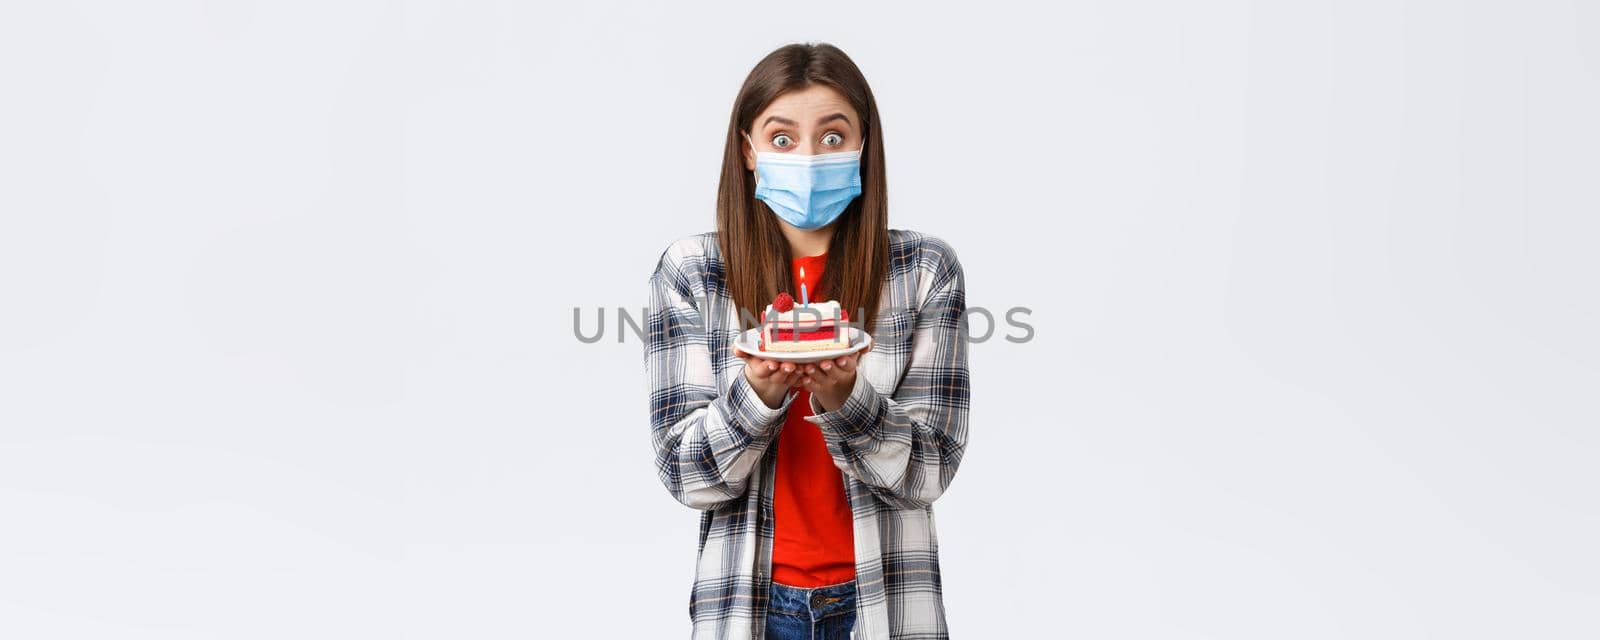 Coronavirus outbreak, lifestyle during social distancing and holidays celebration concept. Cute happy birthday girl making wish, wear medical mask, holding b-day cake, celebrating inside home.